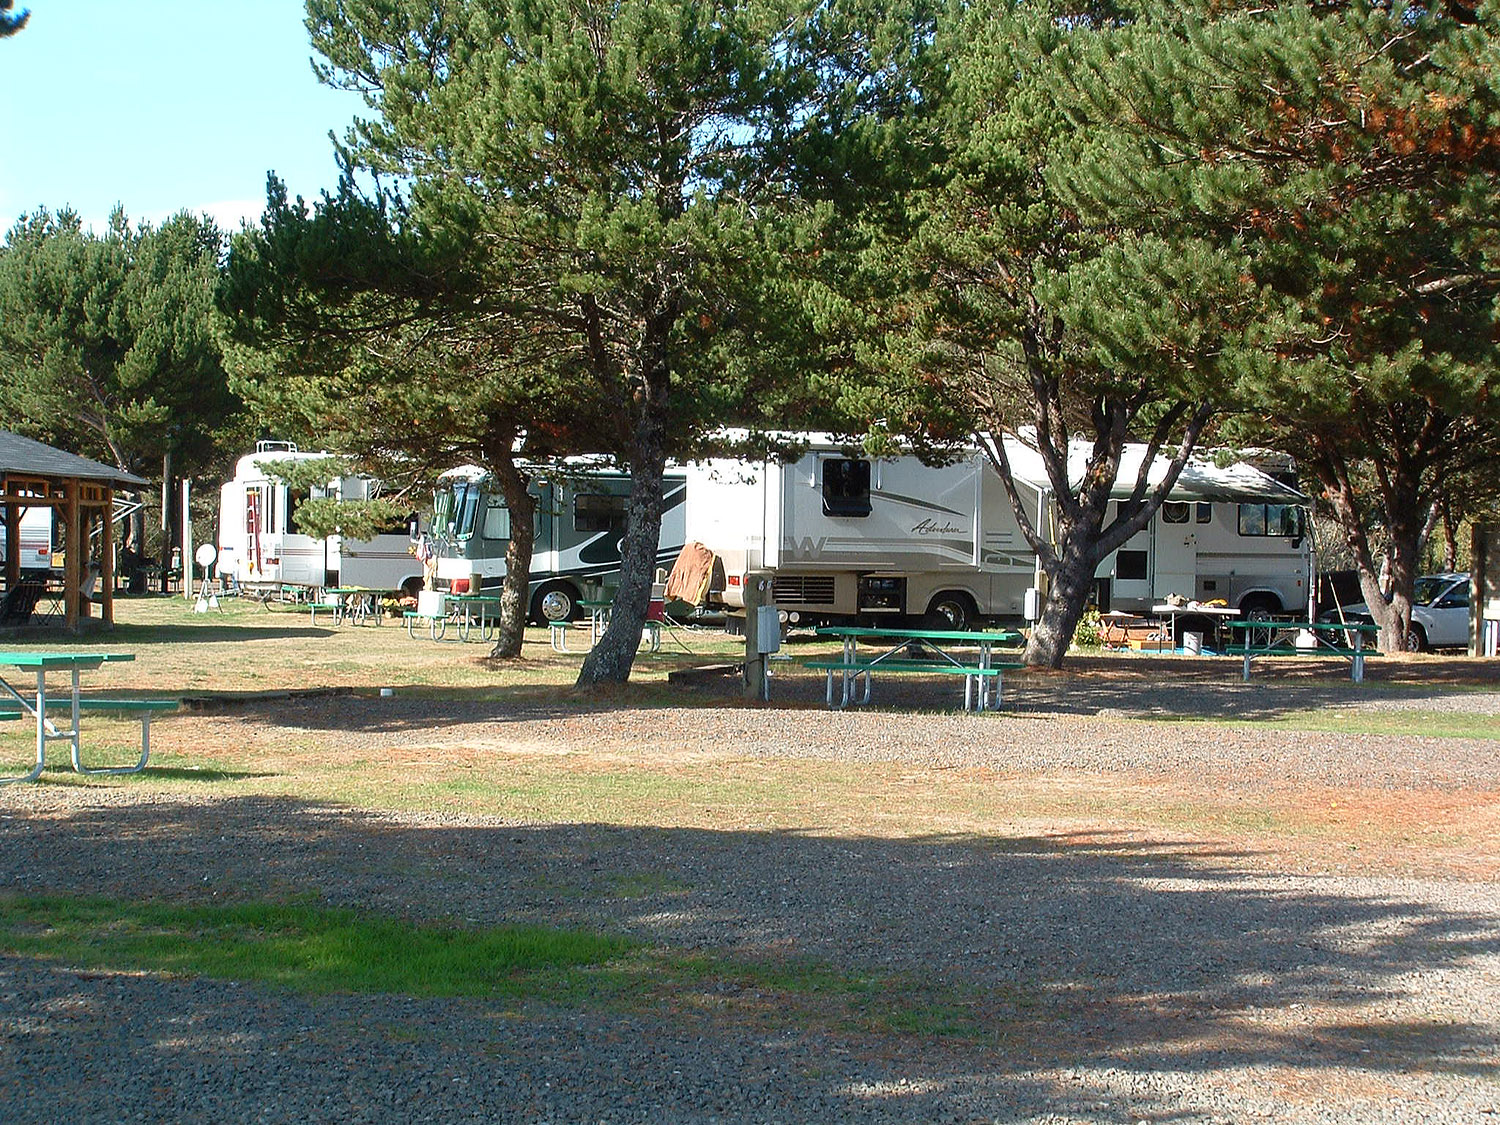 Room Tax added to Camp Fees Effective 11-1-16